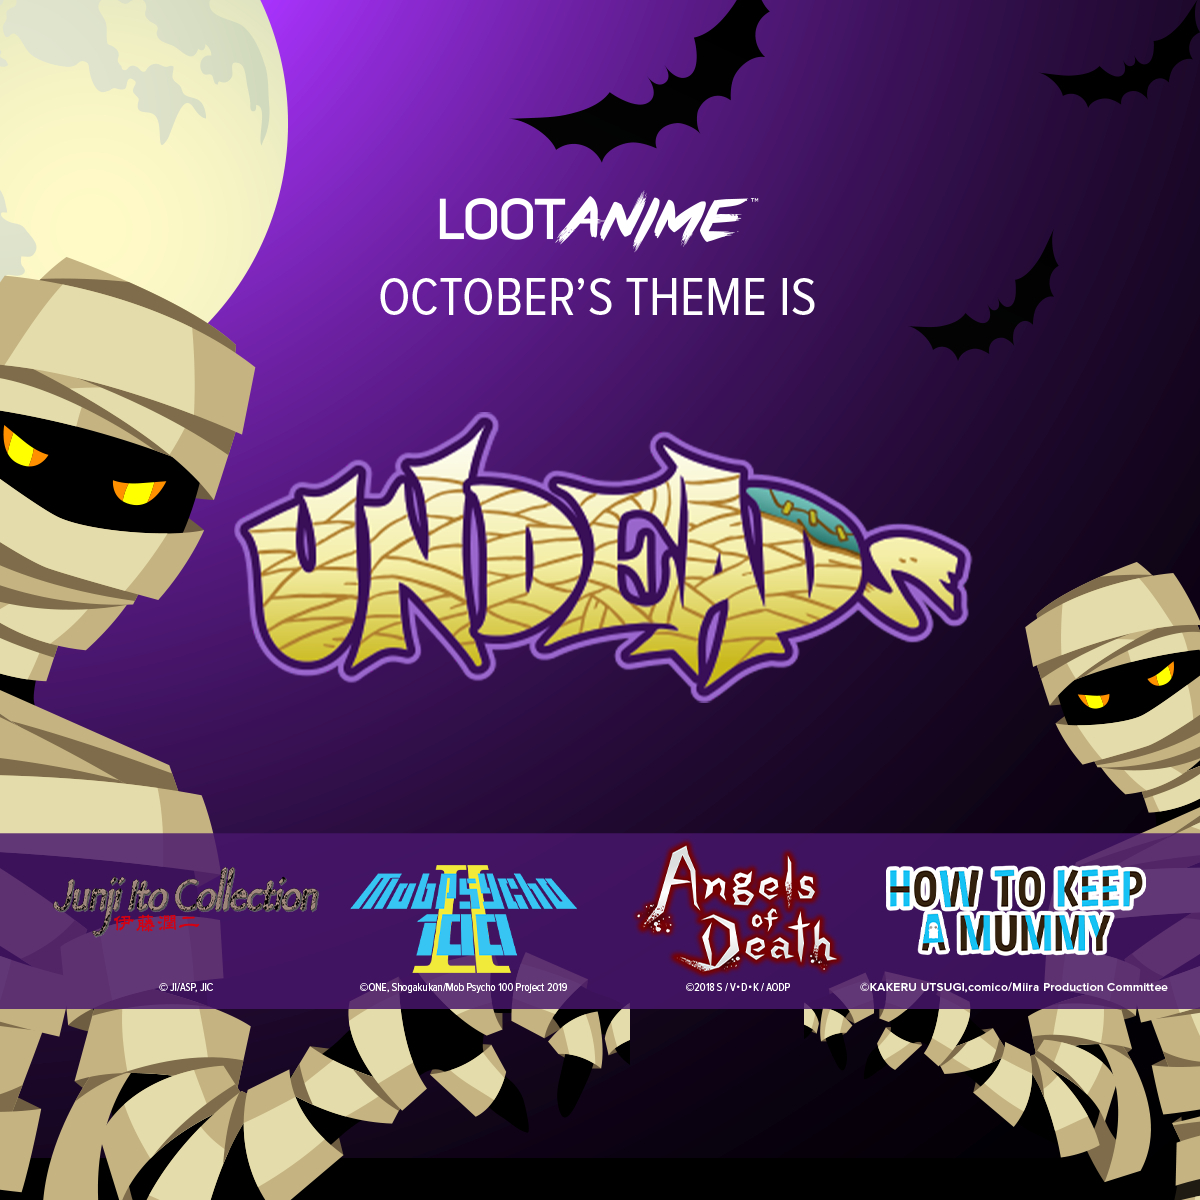 The Daily Crate | THEME REVEAL: The New Themes For Loot Anime and Loot Gaming Are Spoooooky!